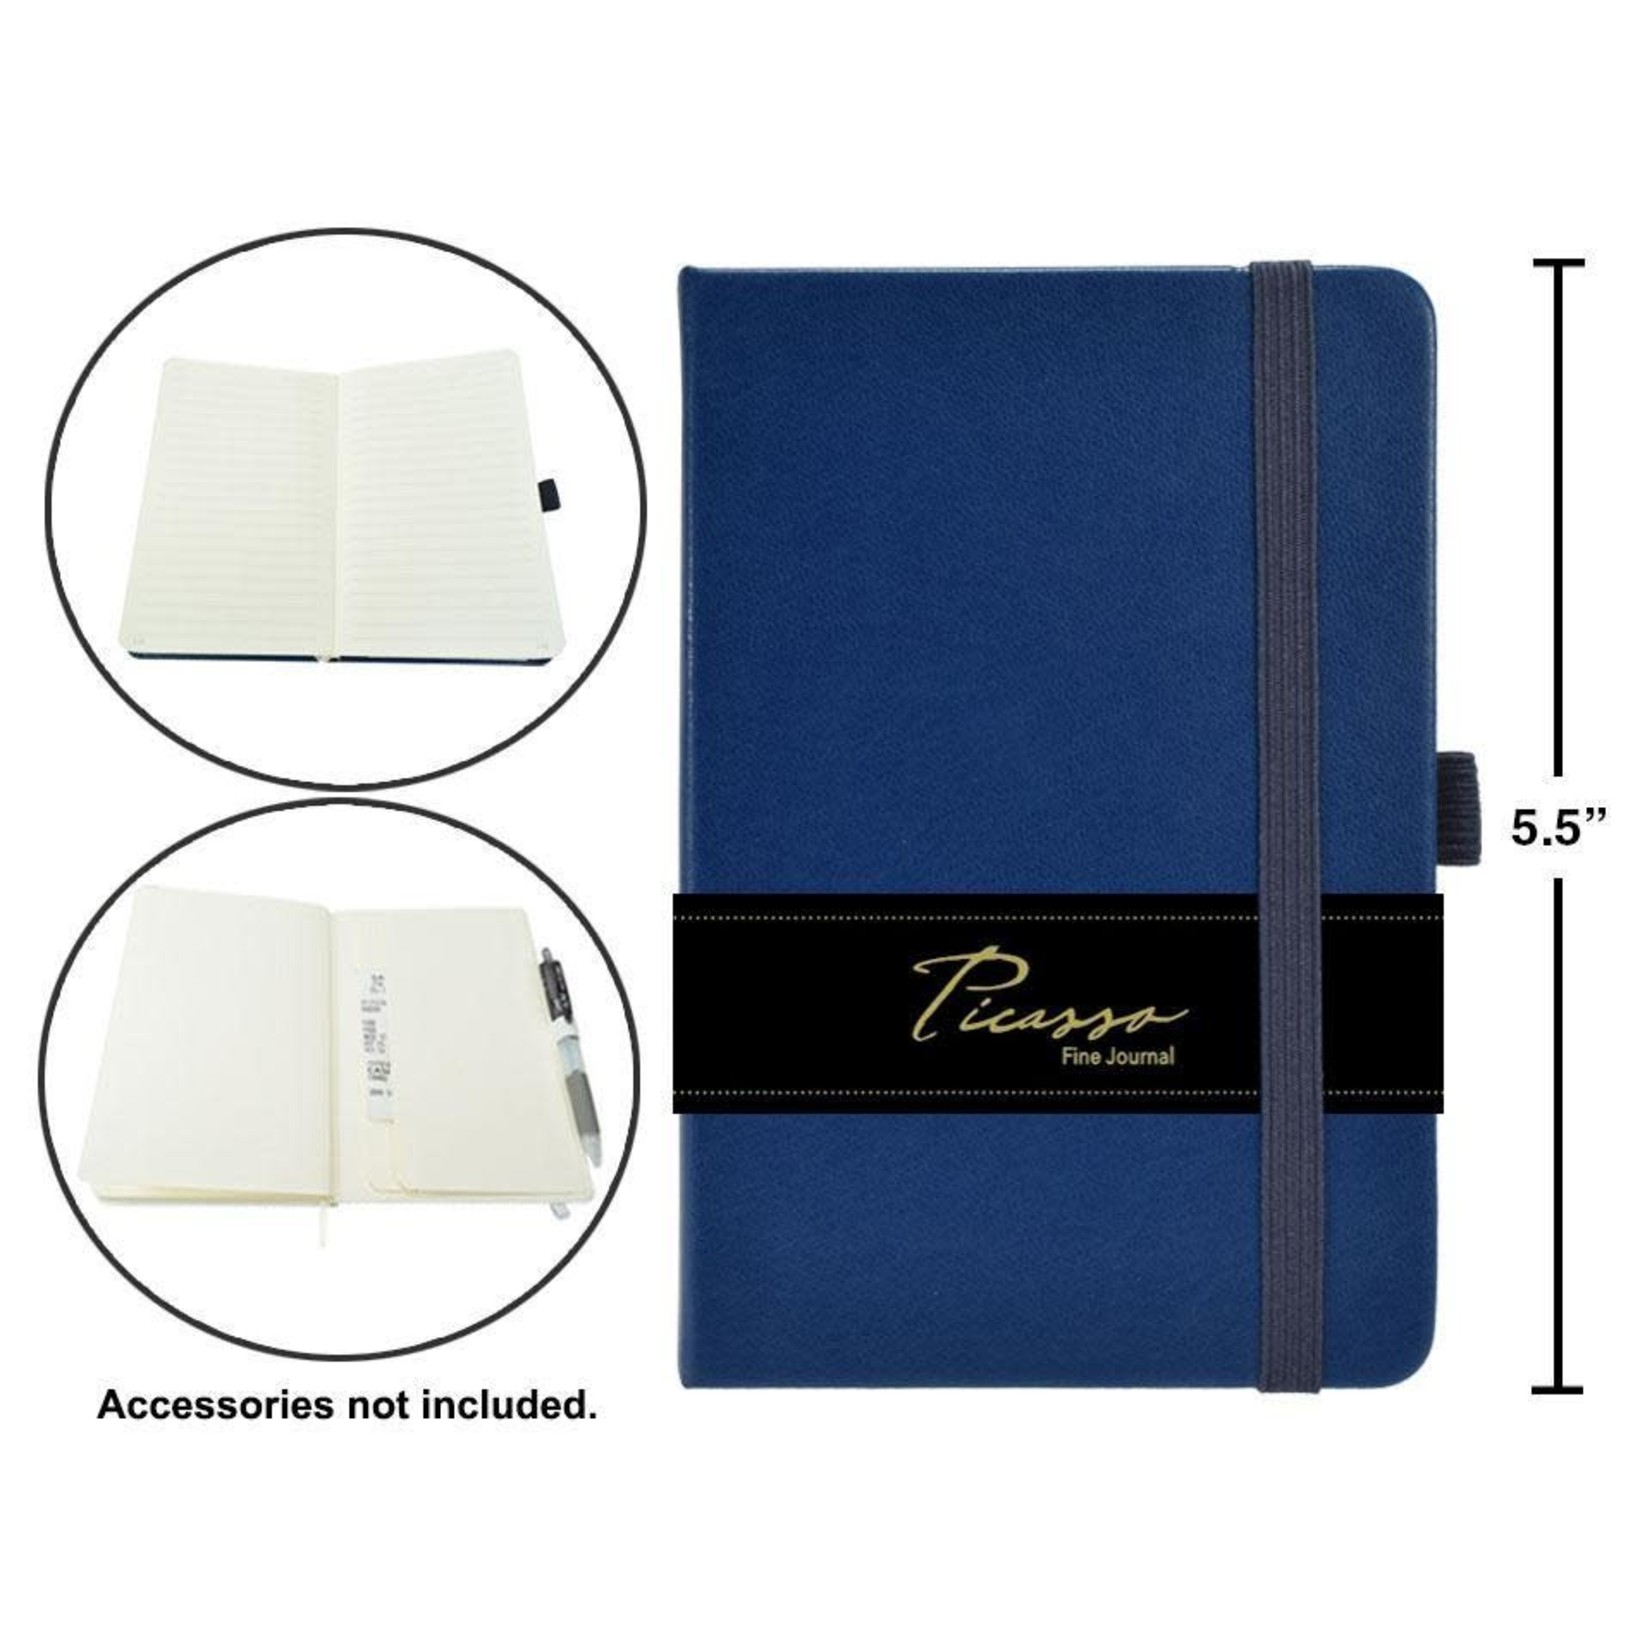 PICASSO 80 SHEETS JOURNAL NAVY